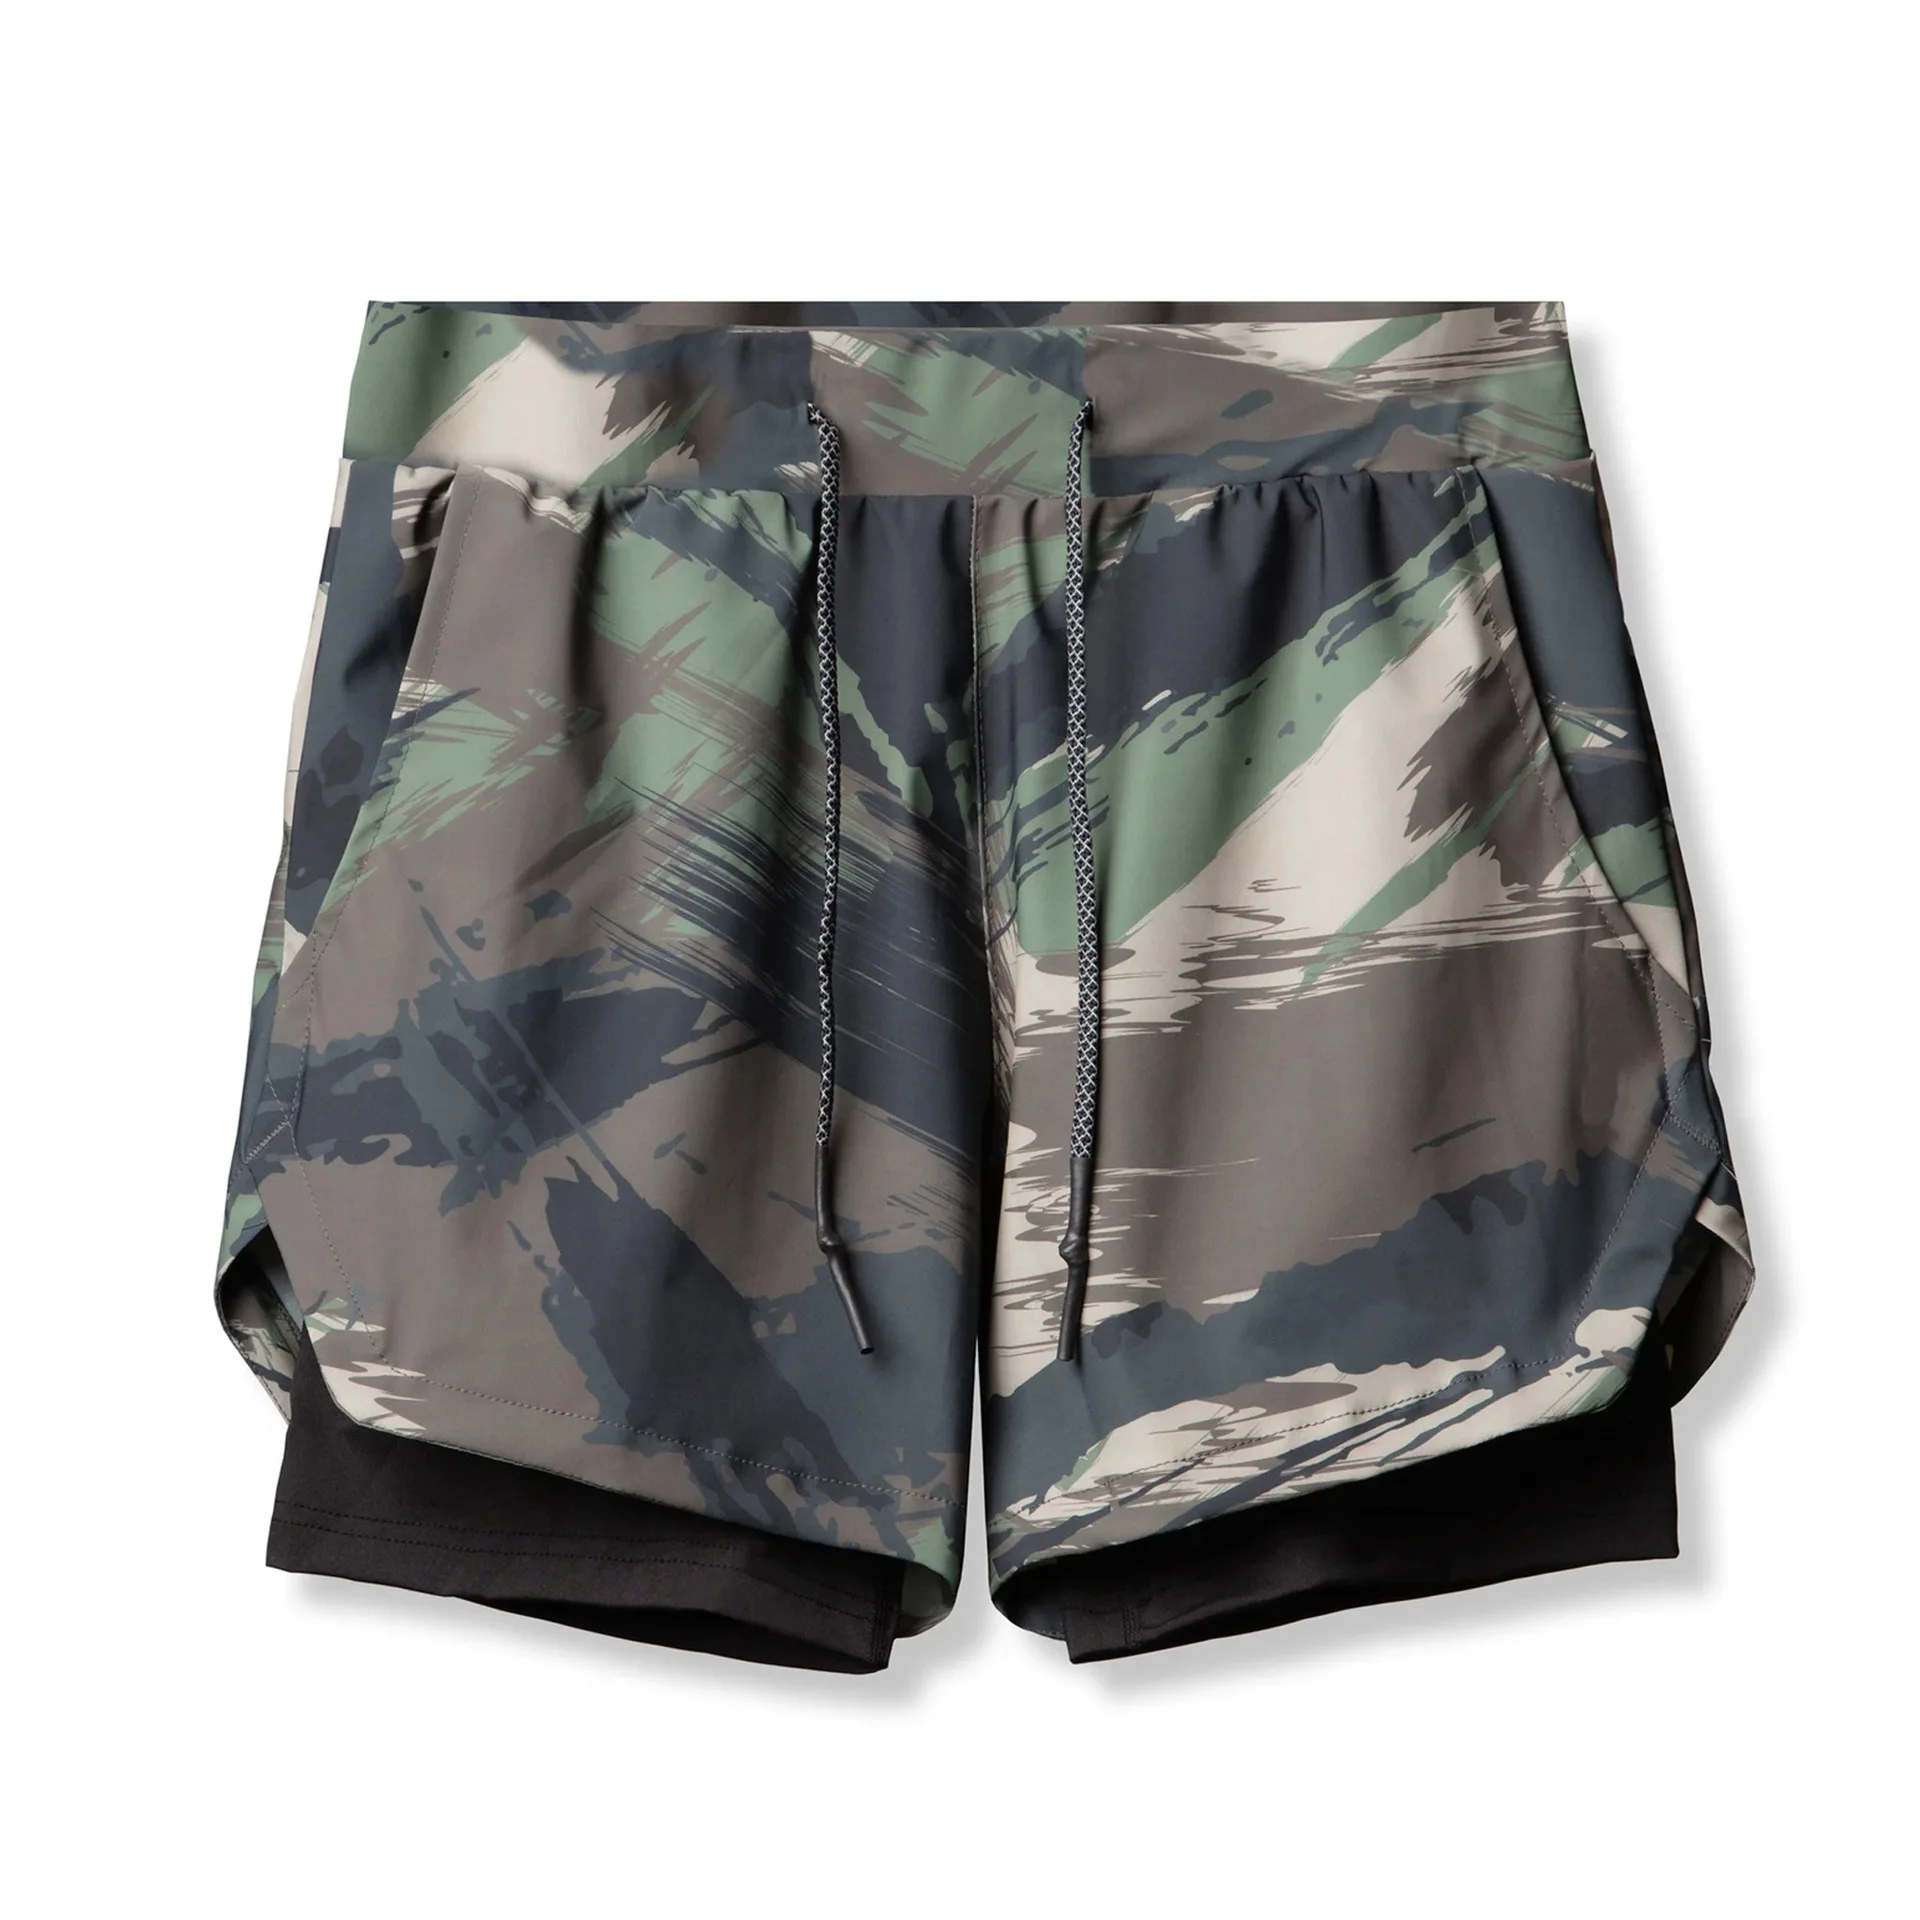 

New Double Layer Anti Light Sunning Shorts Men's Running Training Woven Five Point Pants Fashion Camouflage Basketball Pants